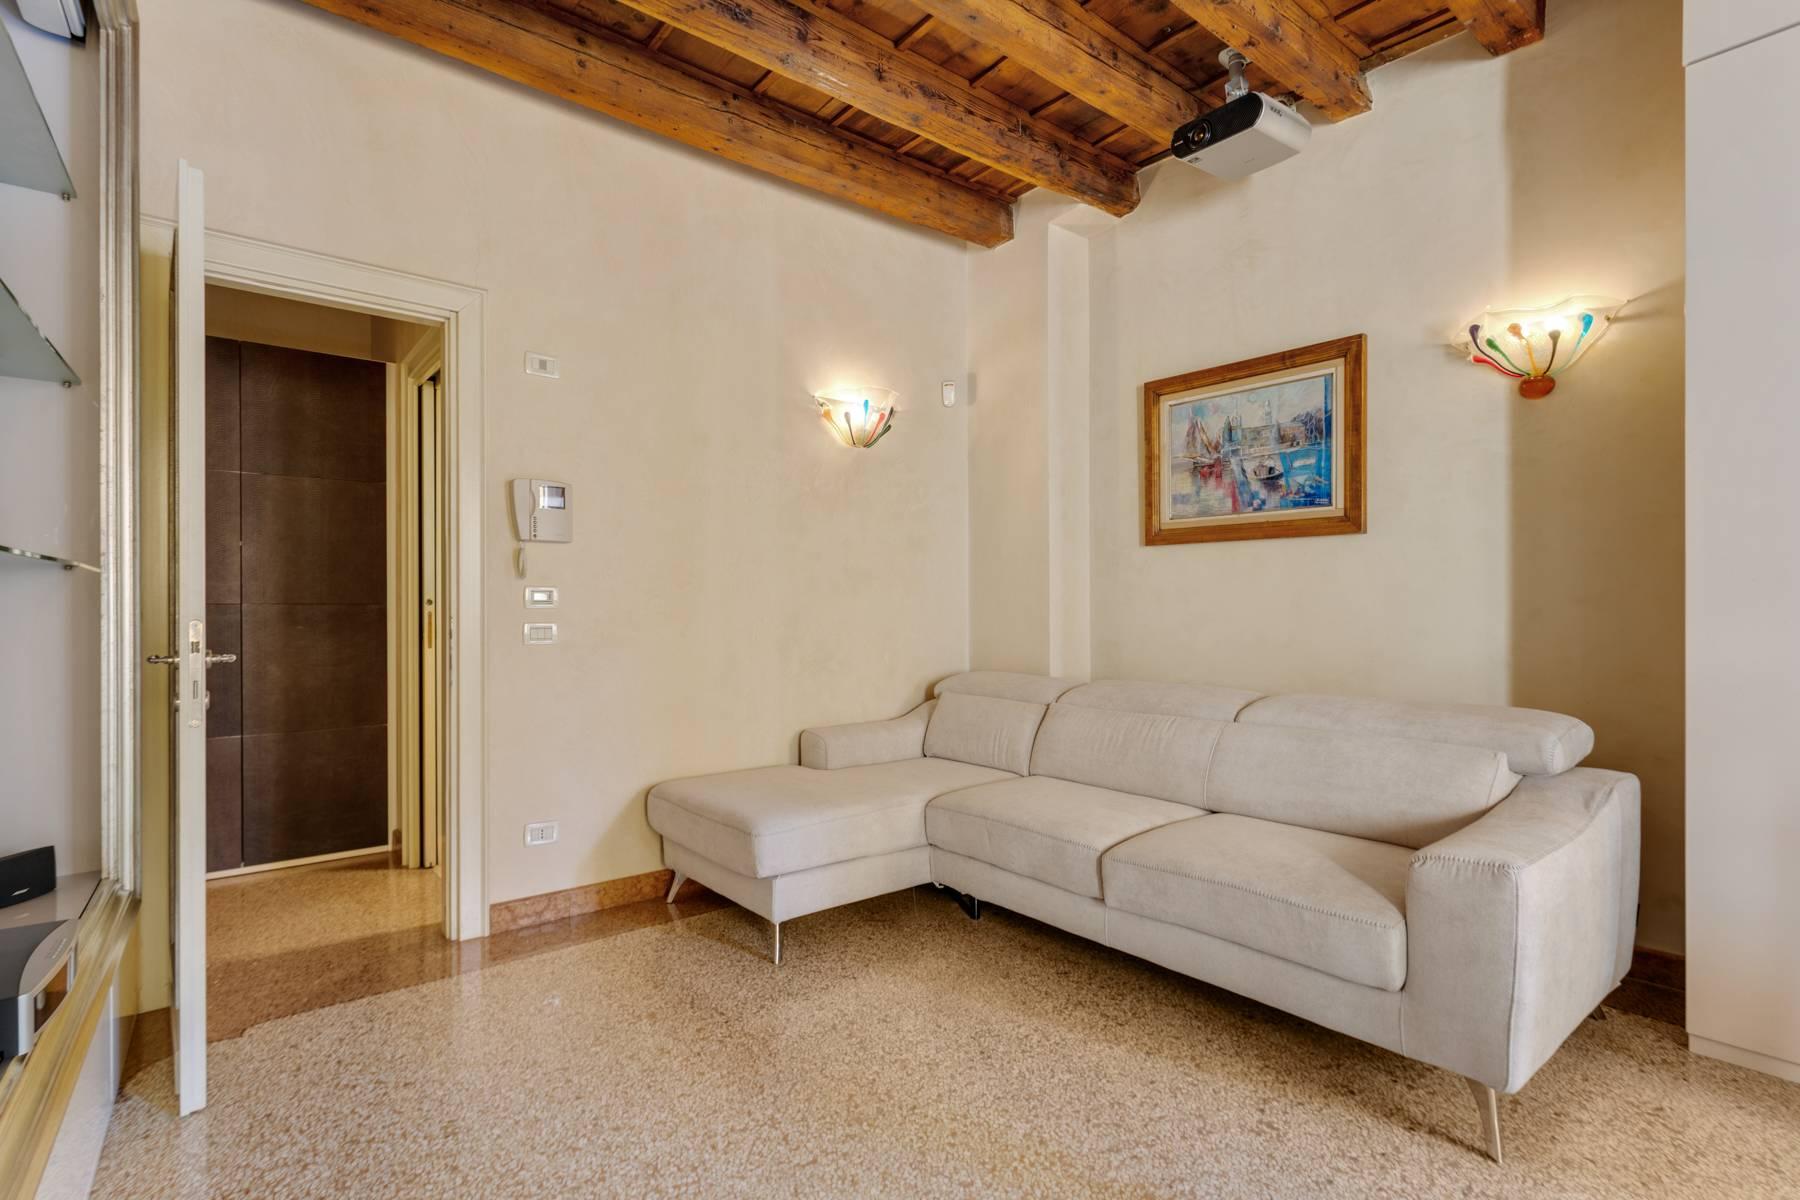 Exquisite apartment just few steps away from Piazza delle Erbe - 17